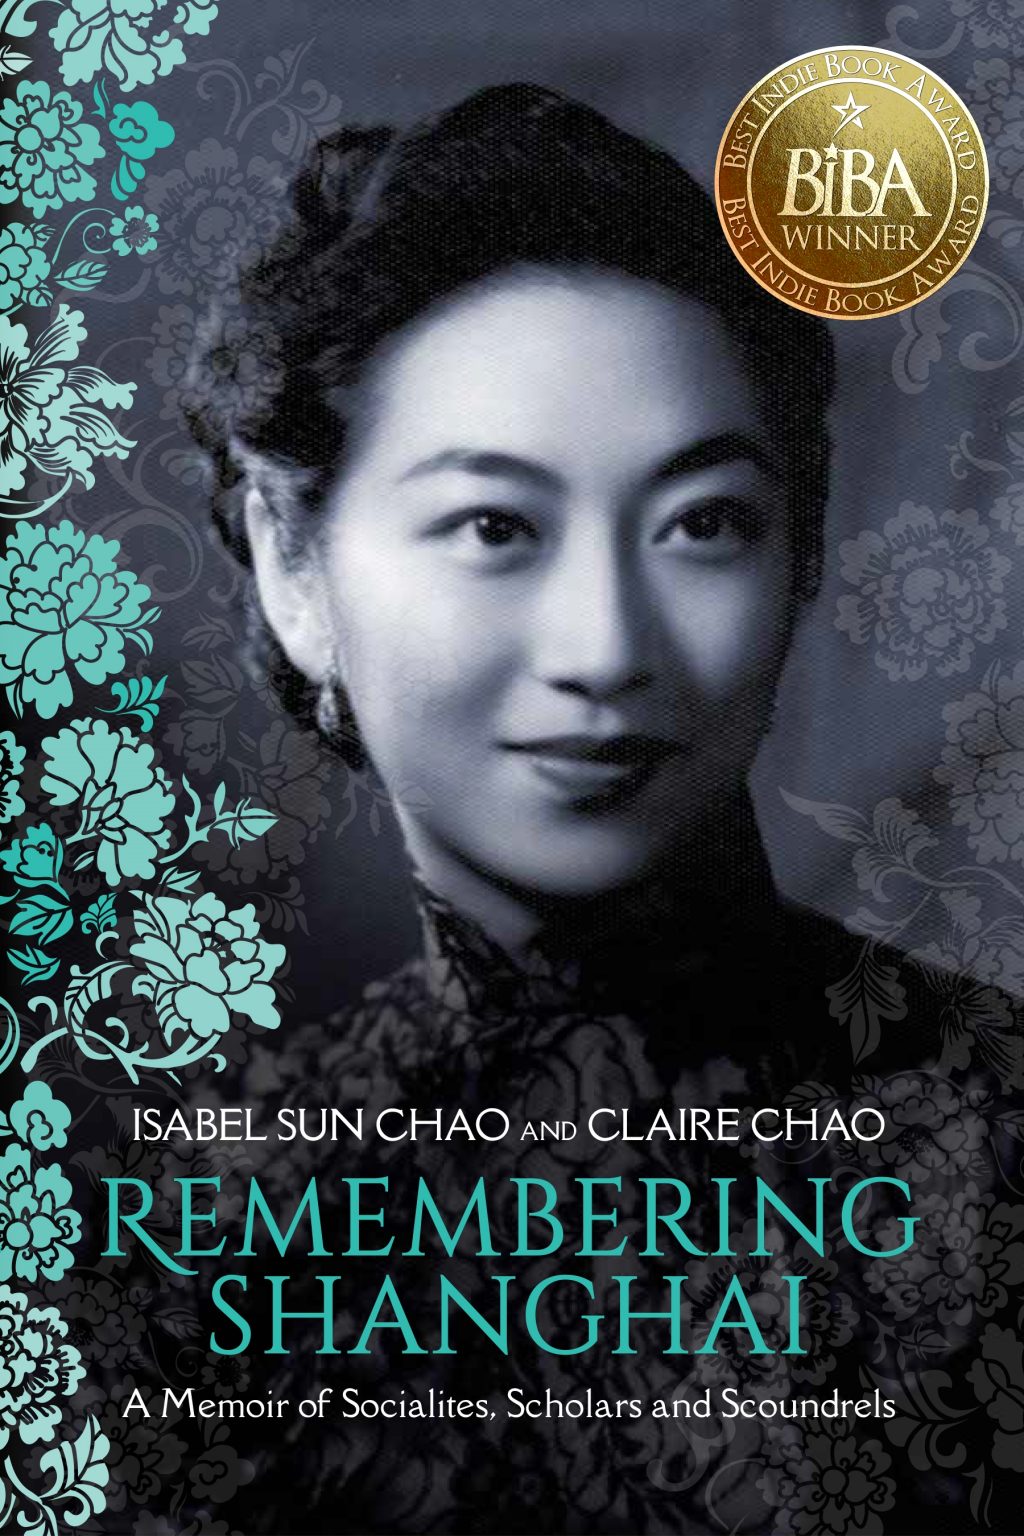 Remembering Shanghai by Isabel Sun Chao